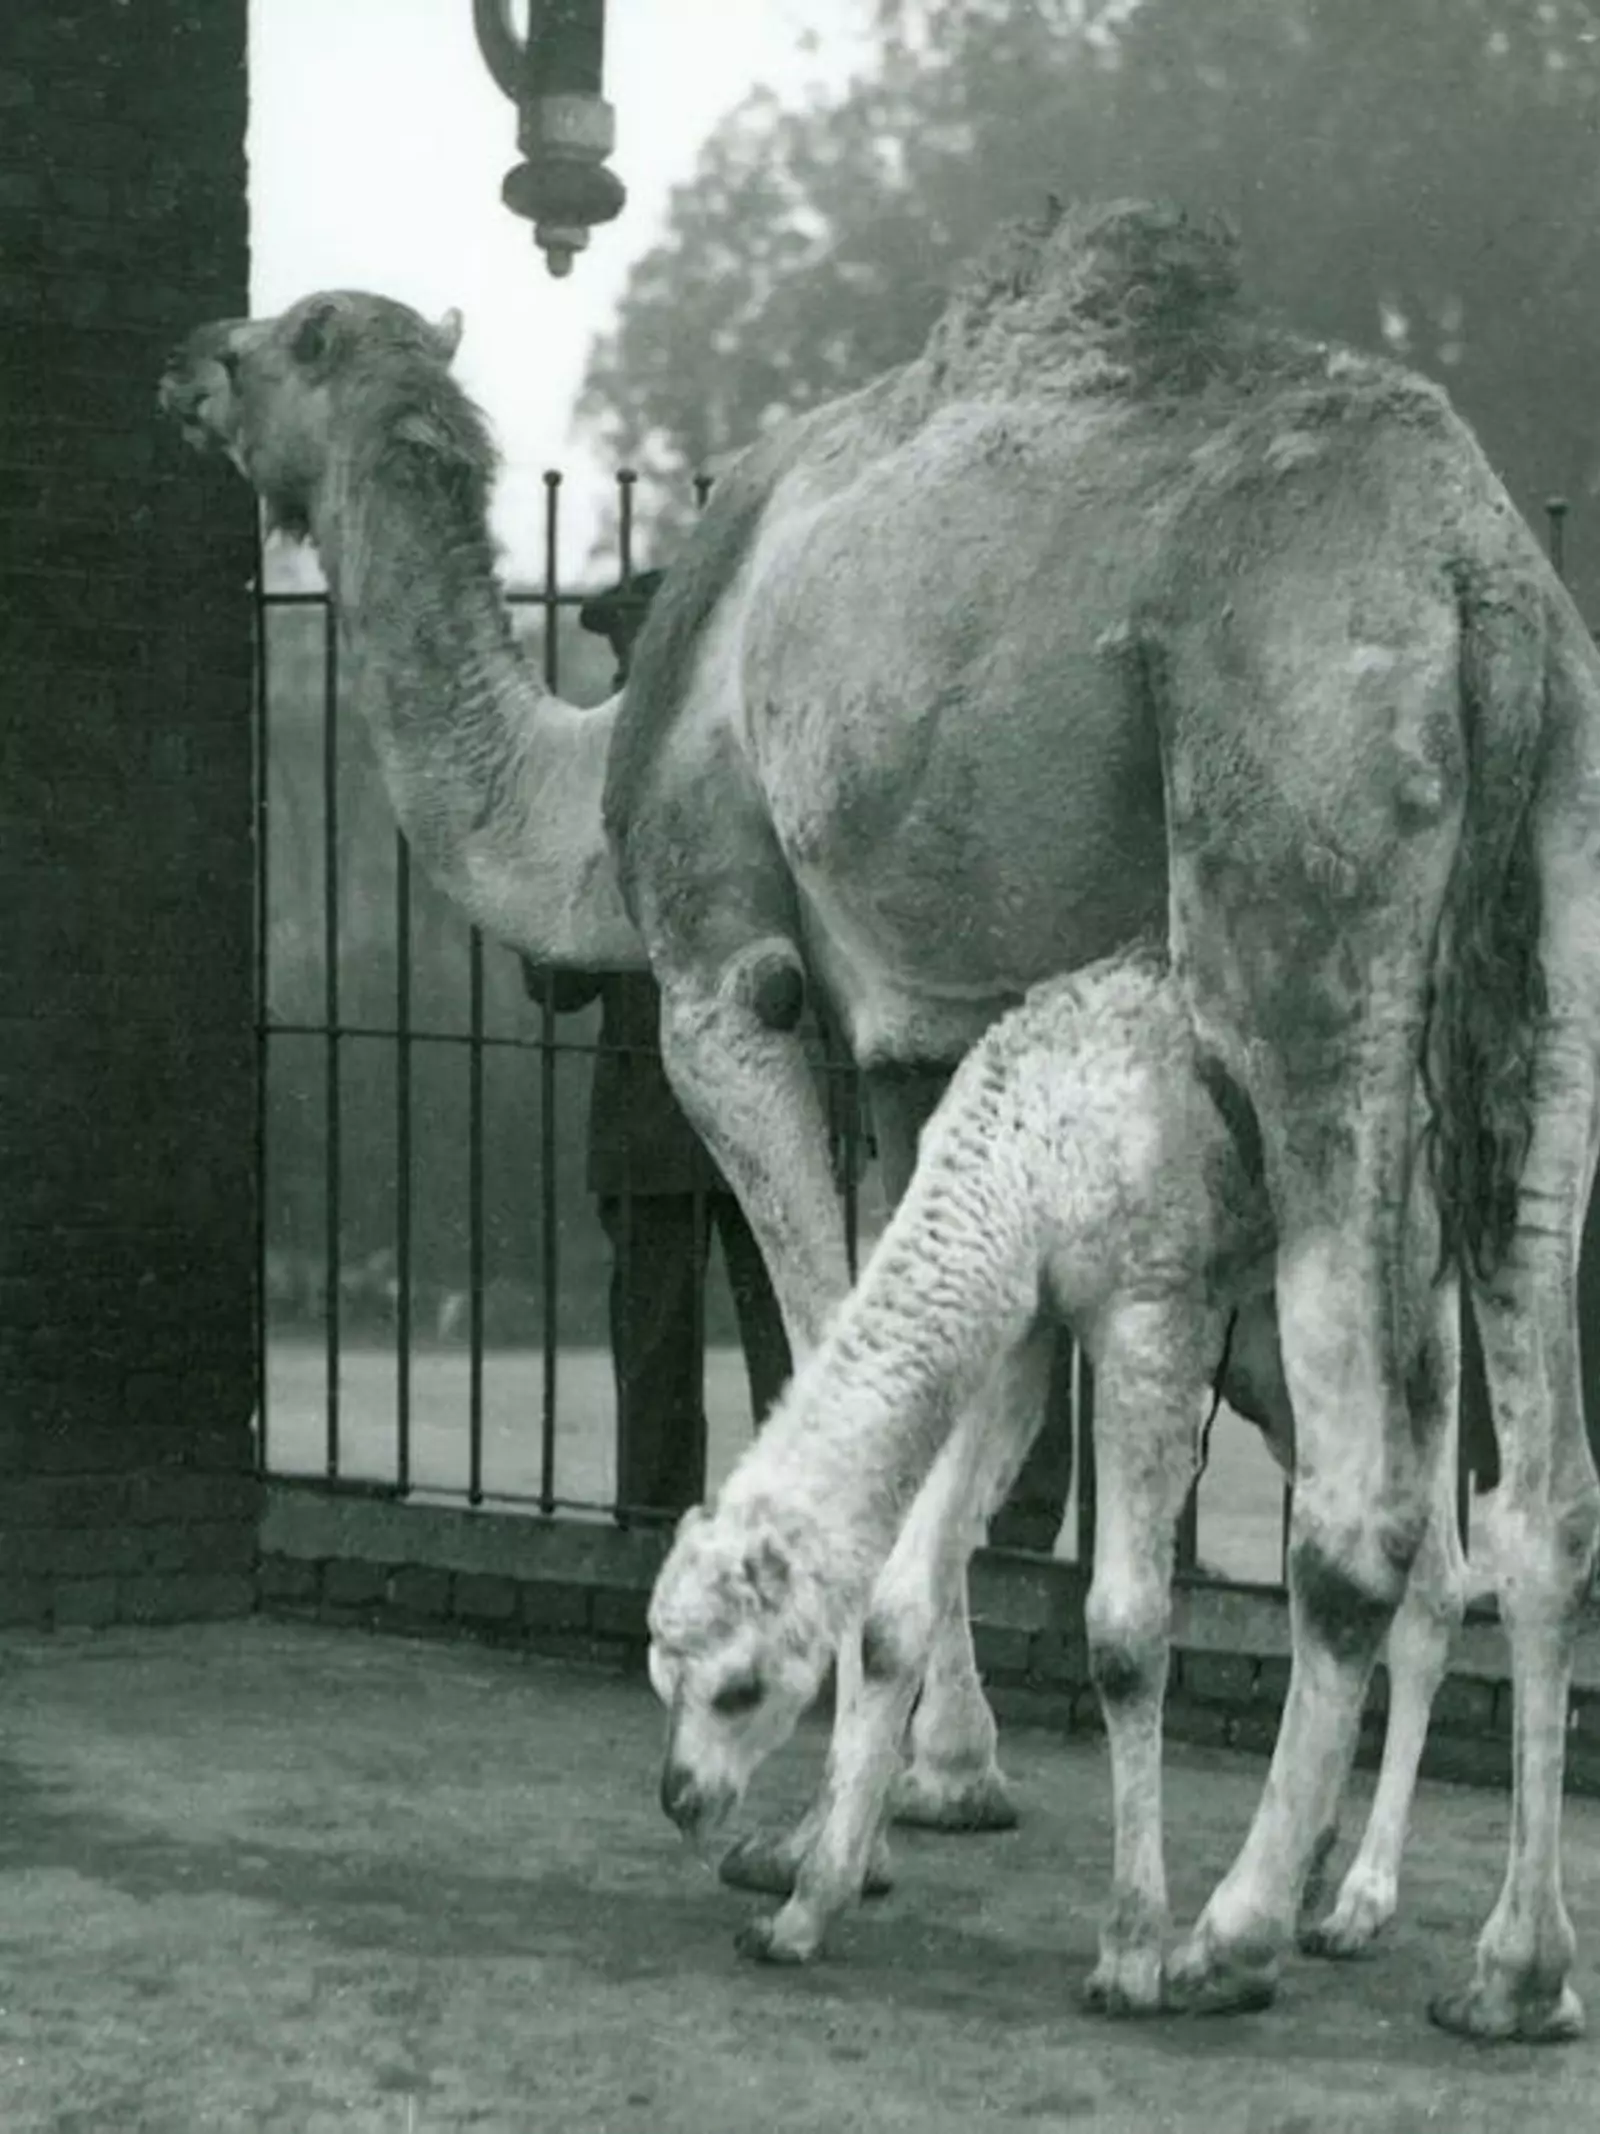 Male Arabian Camel / Dromedary calf  'Noel' with his mother. Visitors are watching them through the railings and the door of the Camel House can be seen to the left.